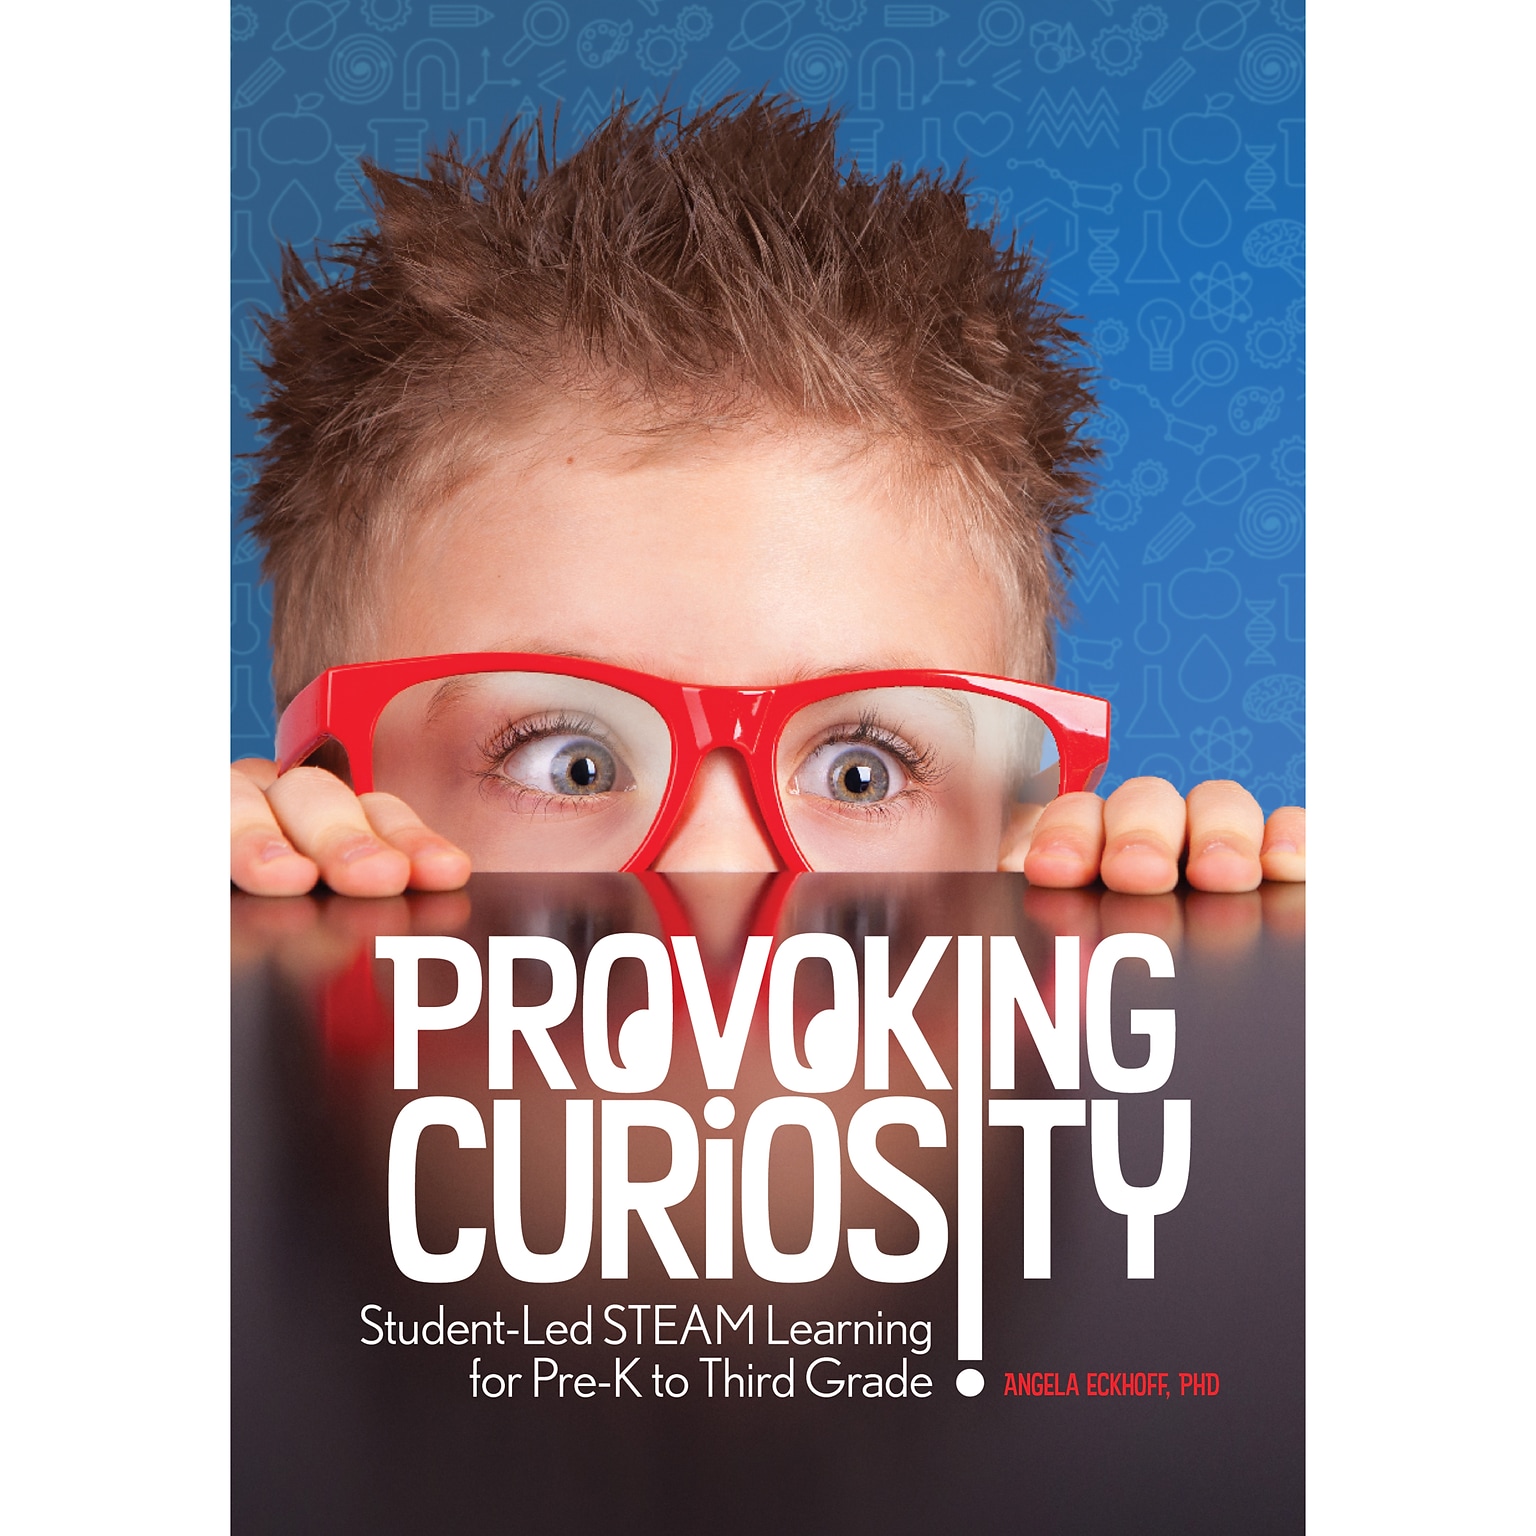 Gryphon House, Provoking Curiosity: Student-Led STEAM Learning, Softcover Book, Grade PK-3 (GR-15968)